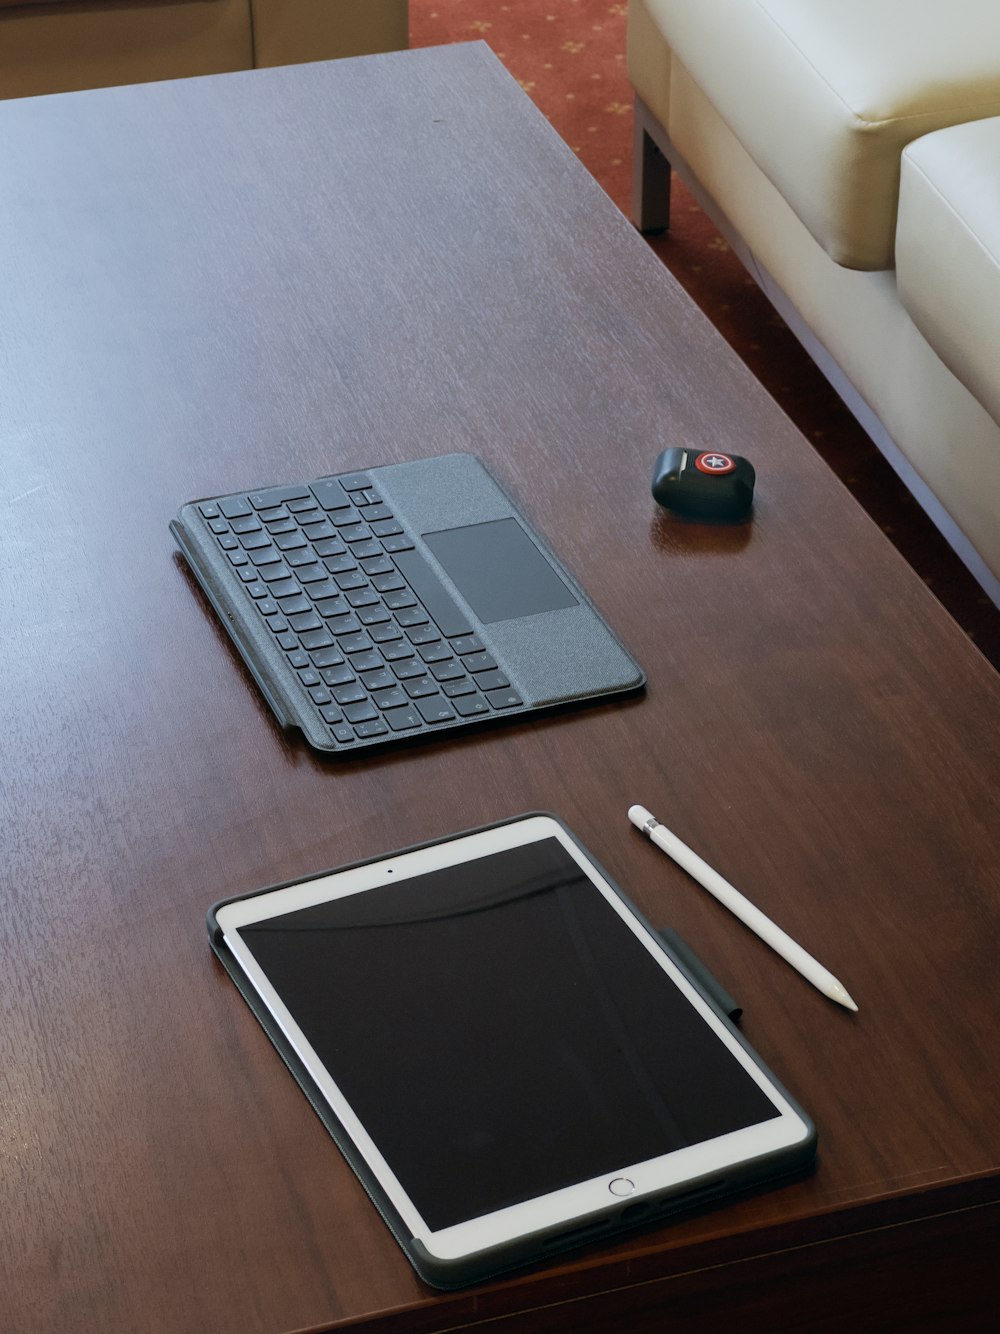 a tablet, keyboard, mouse, and pen on a table